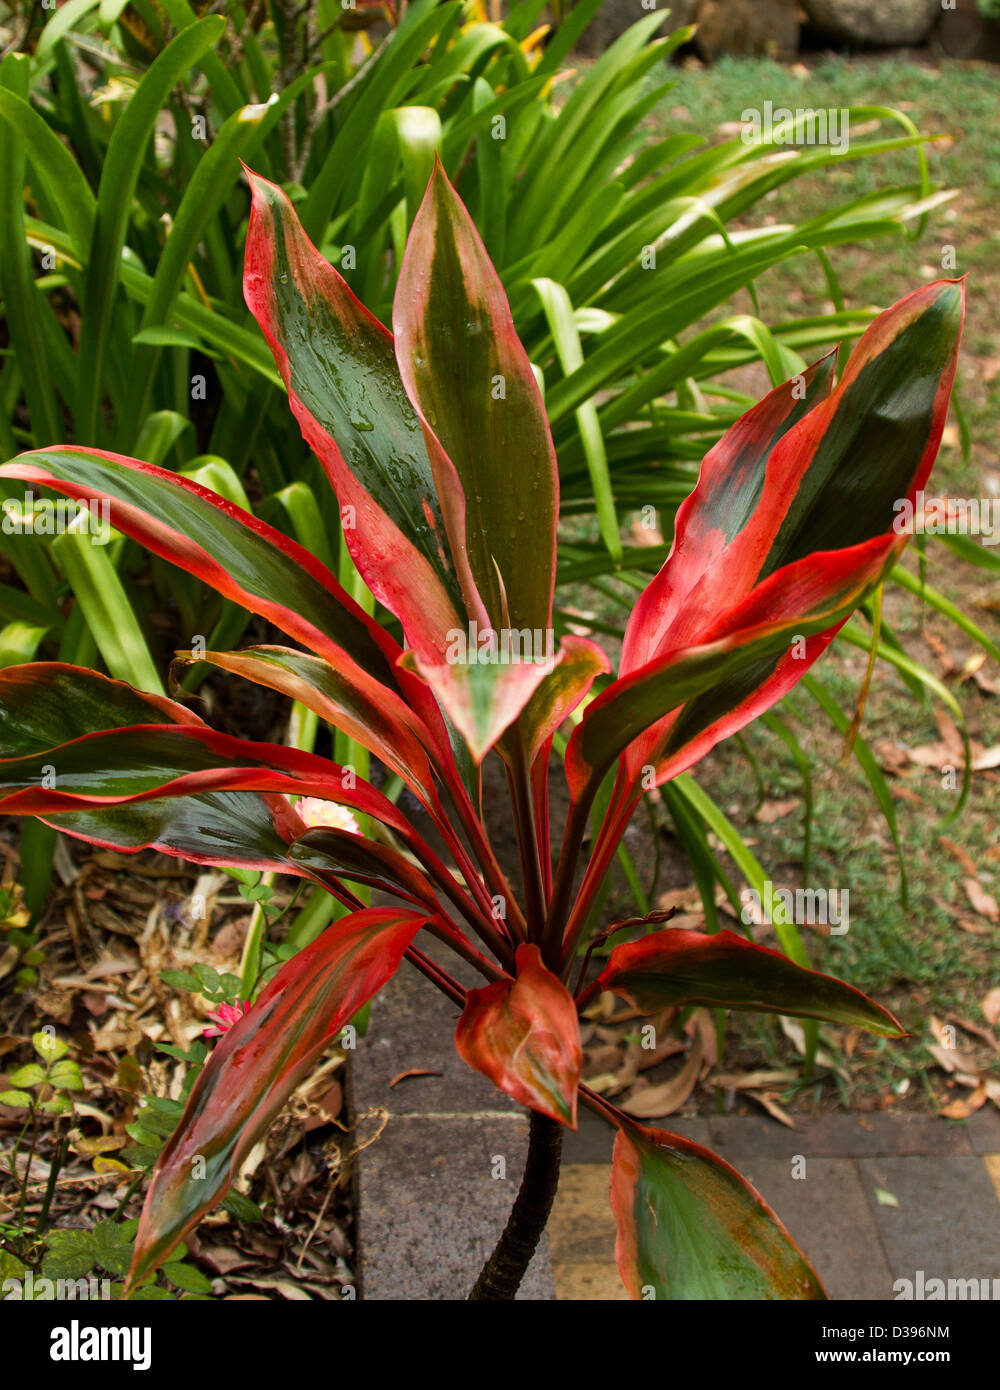 Cordyline fruticosa cultivar 'Rainbow Red' - foliage plant with brightly coloured red and green striped variegated leaves Stock Photo